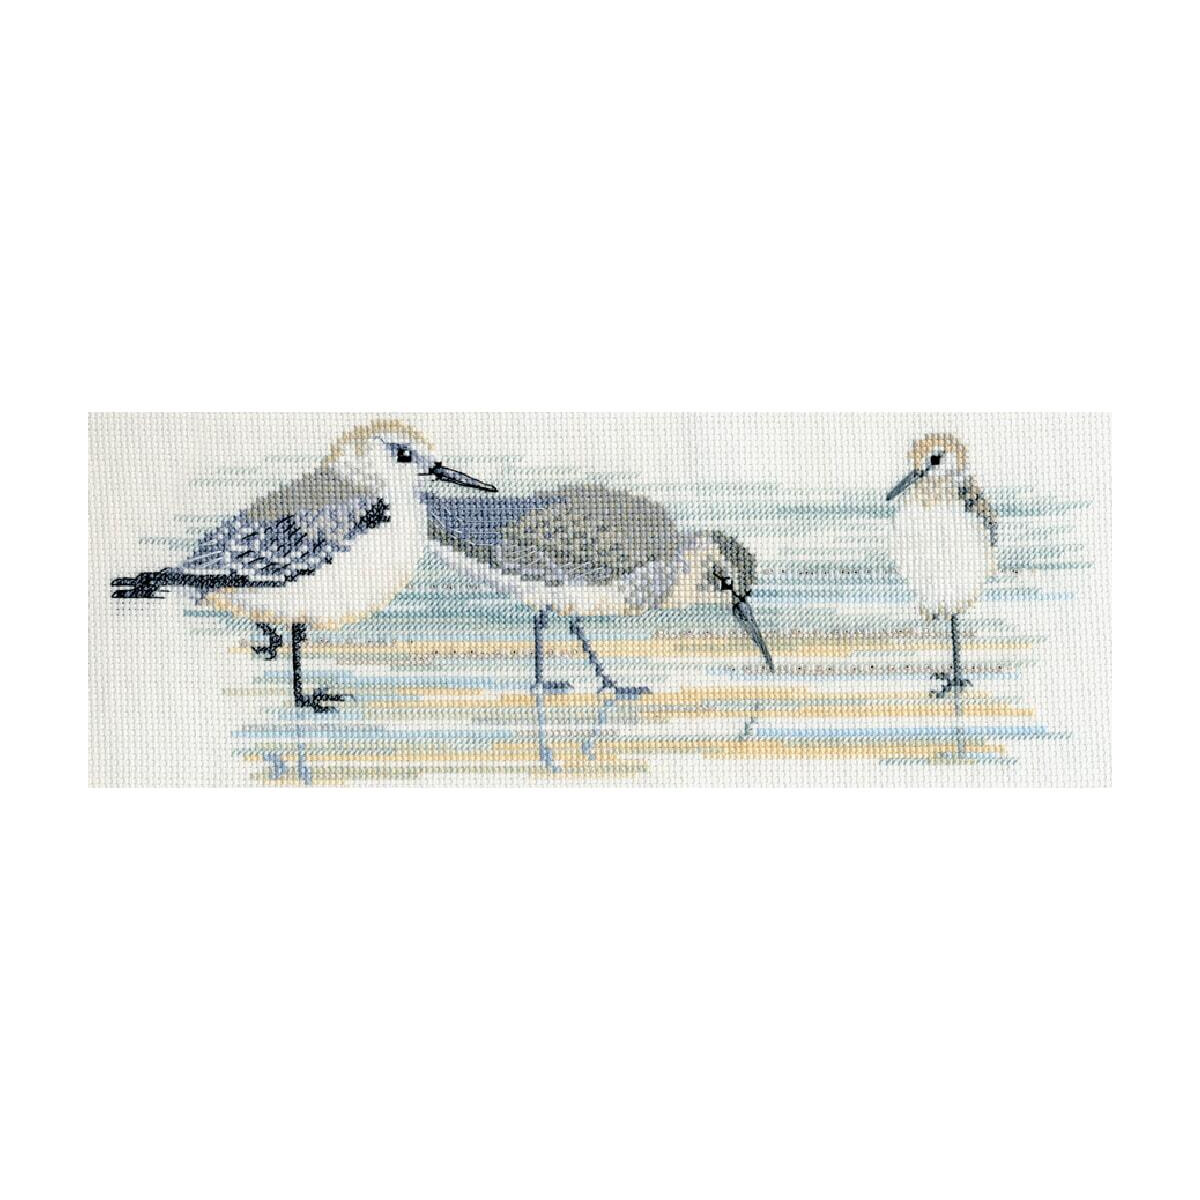 An embroidery pack from Bothy Threads showing three...